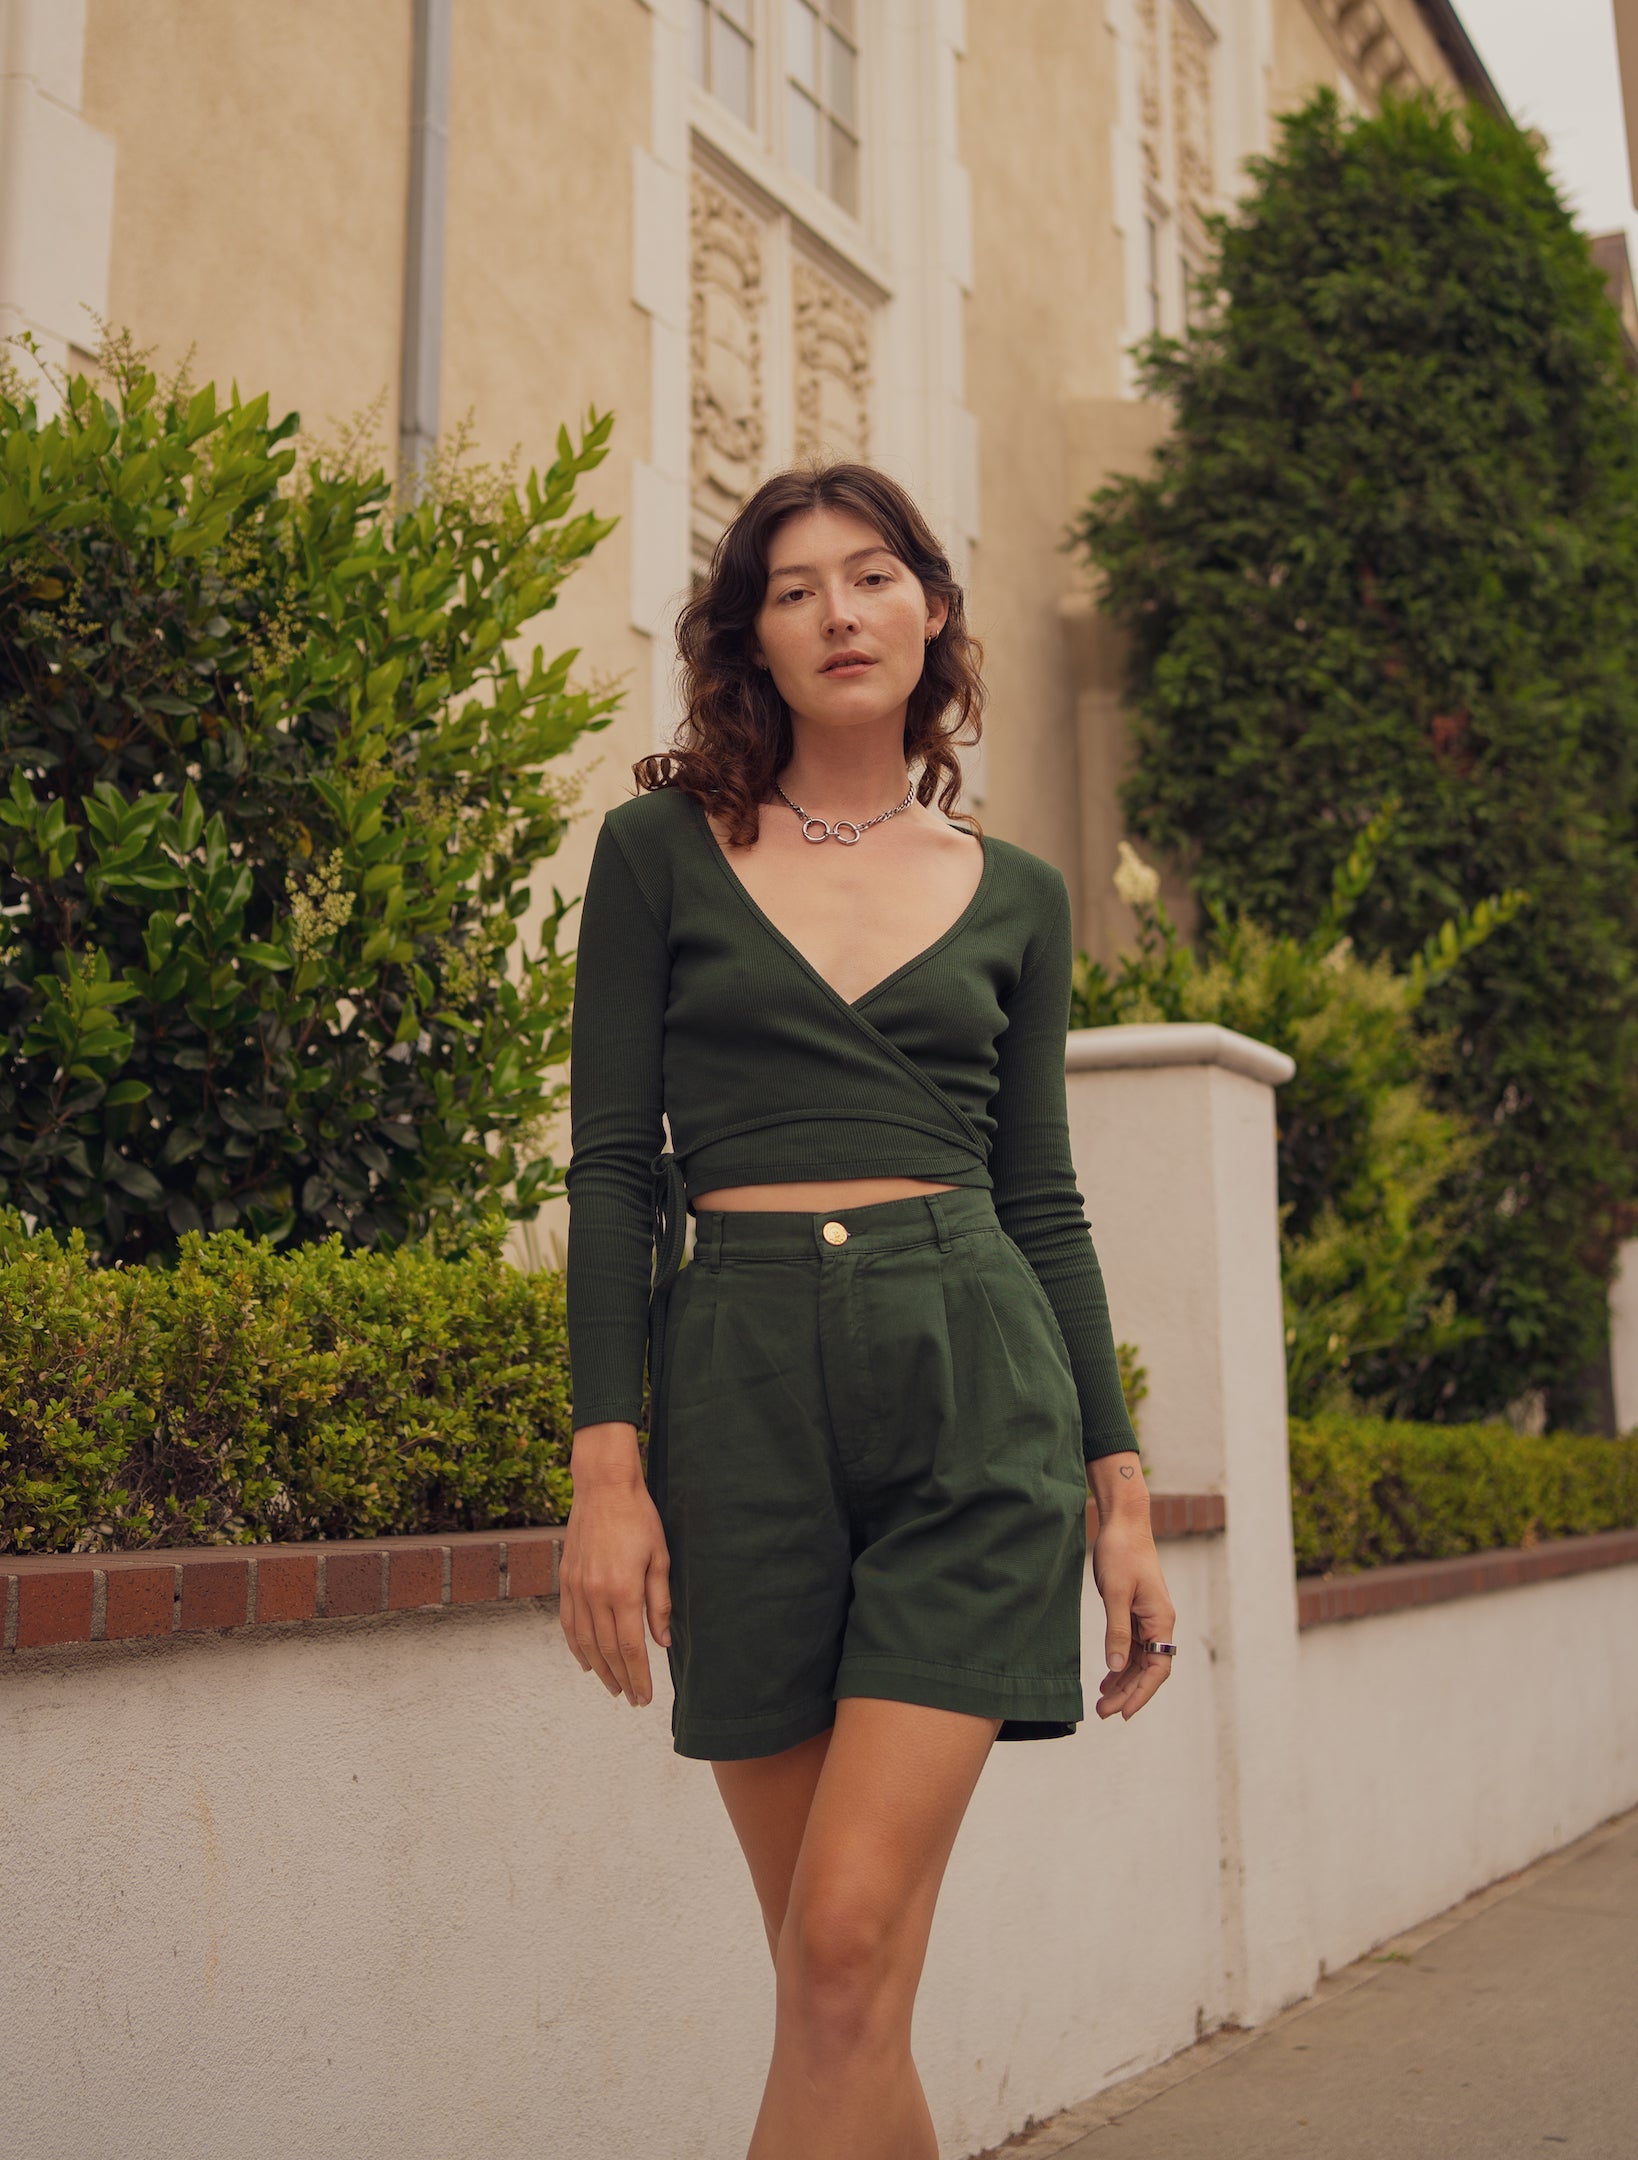 Alexandra Skye is wearing a Wrap Top in Swamp Green and Trouser Shorts in Swamp Green